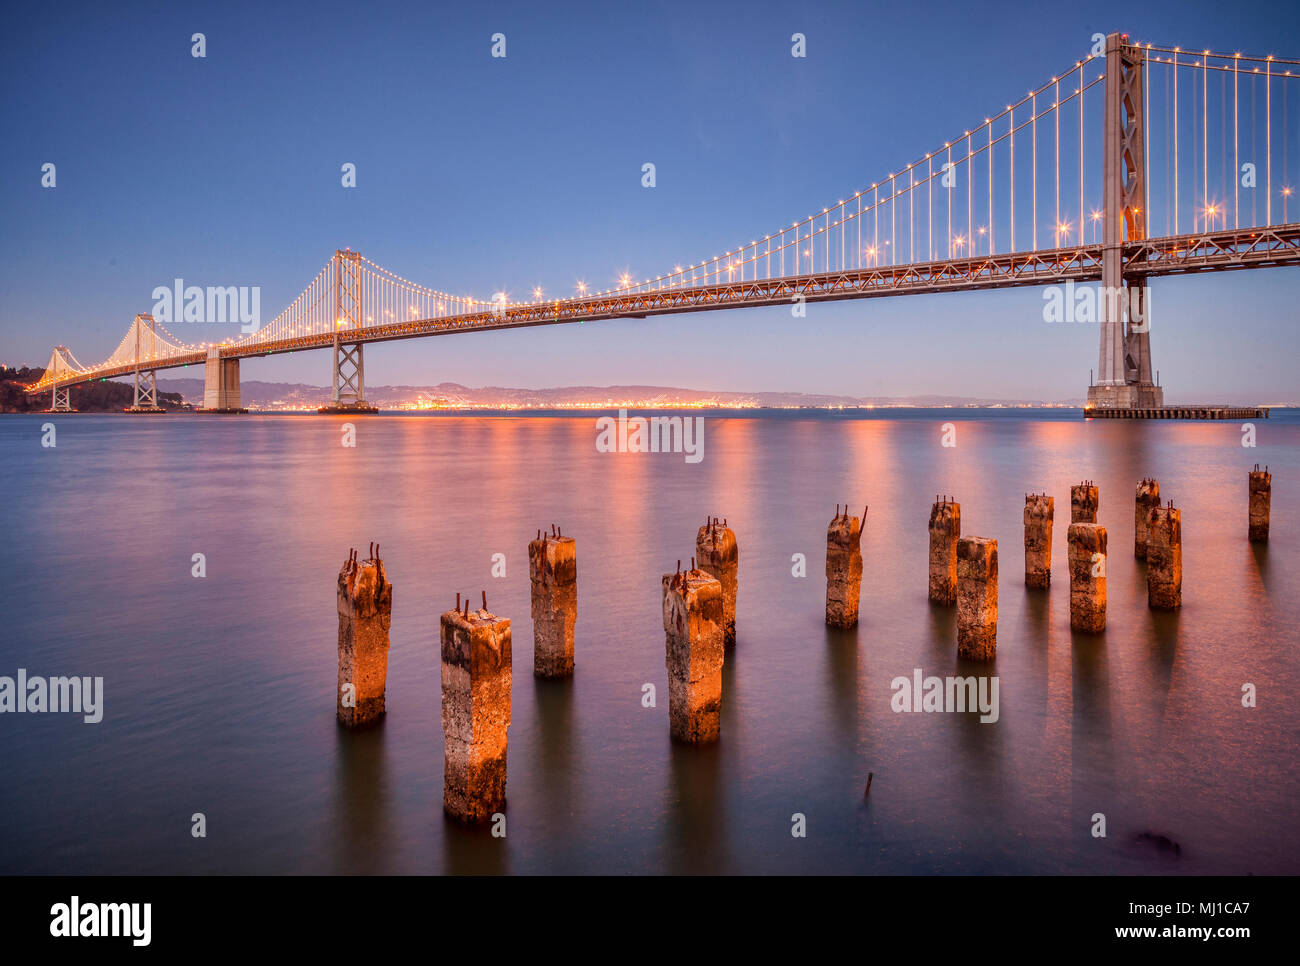 The San Francisco Bay Bridge at night and old concrete jetty pilings. Stock Photo